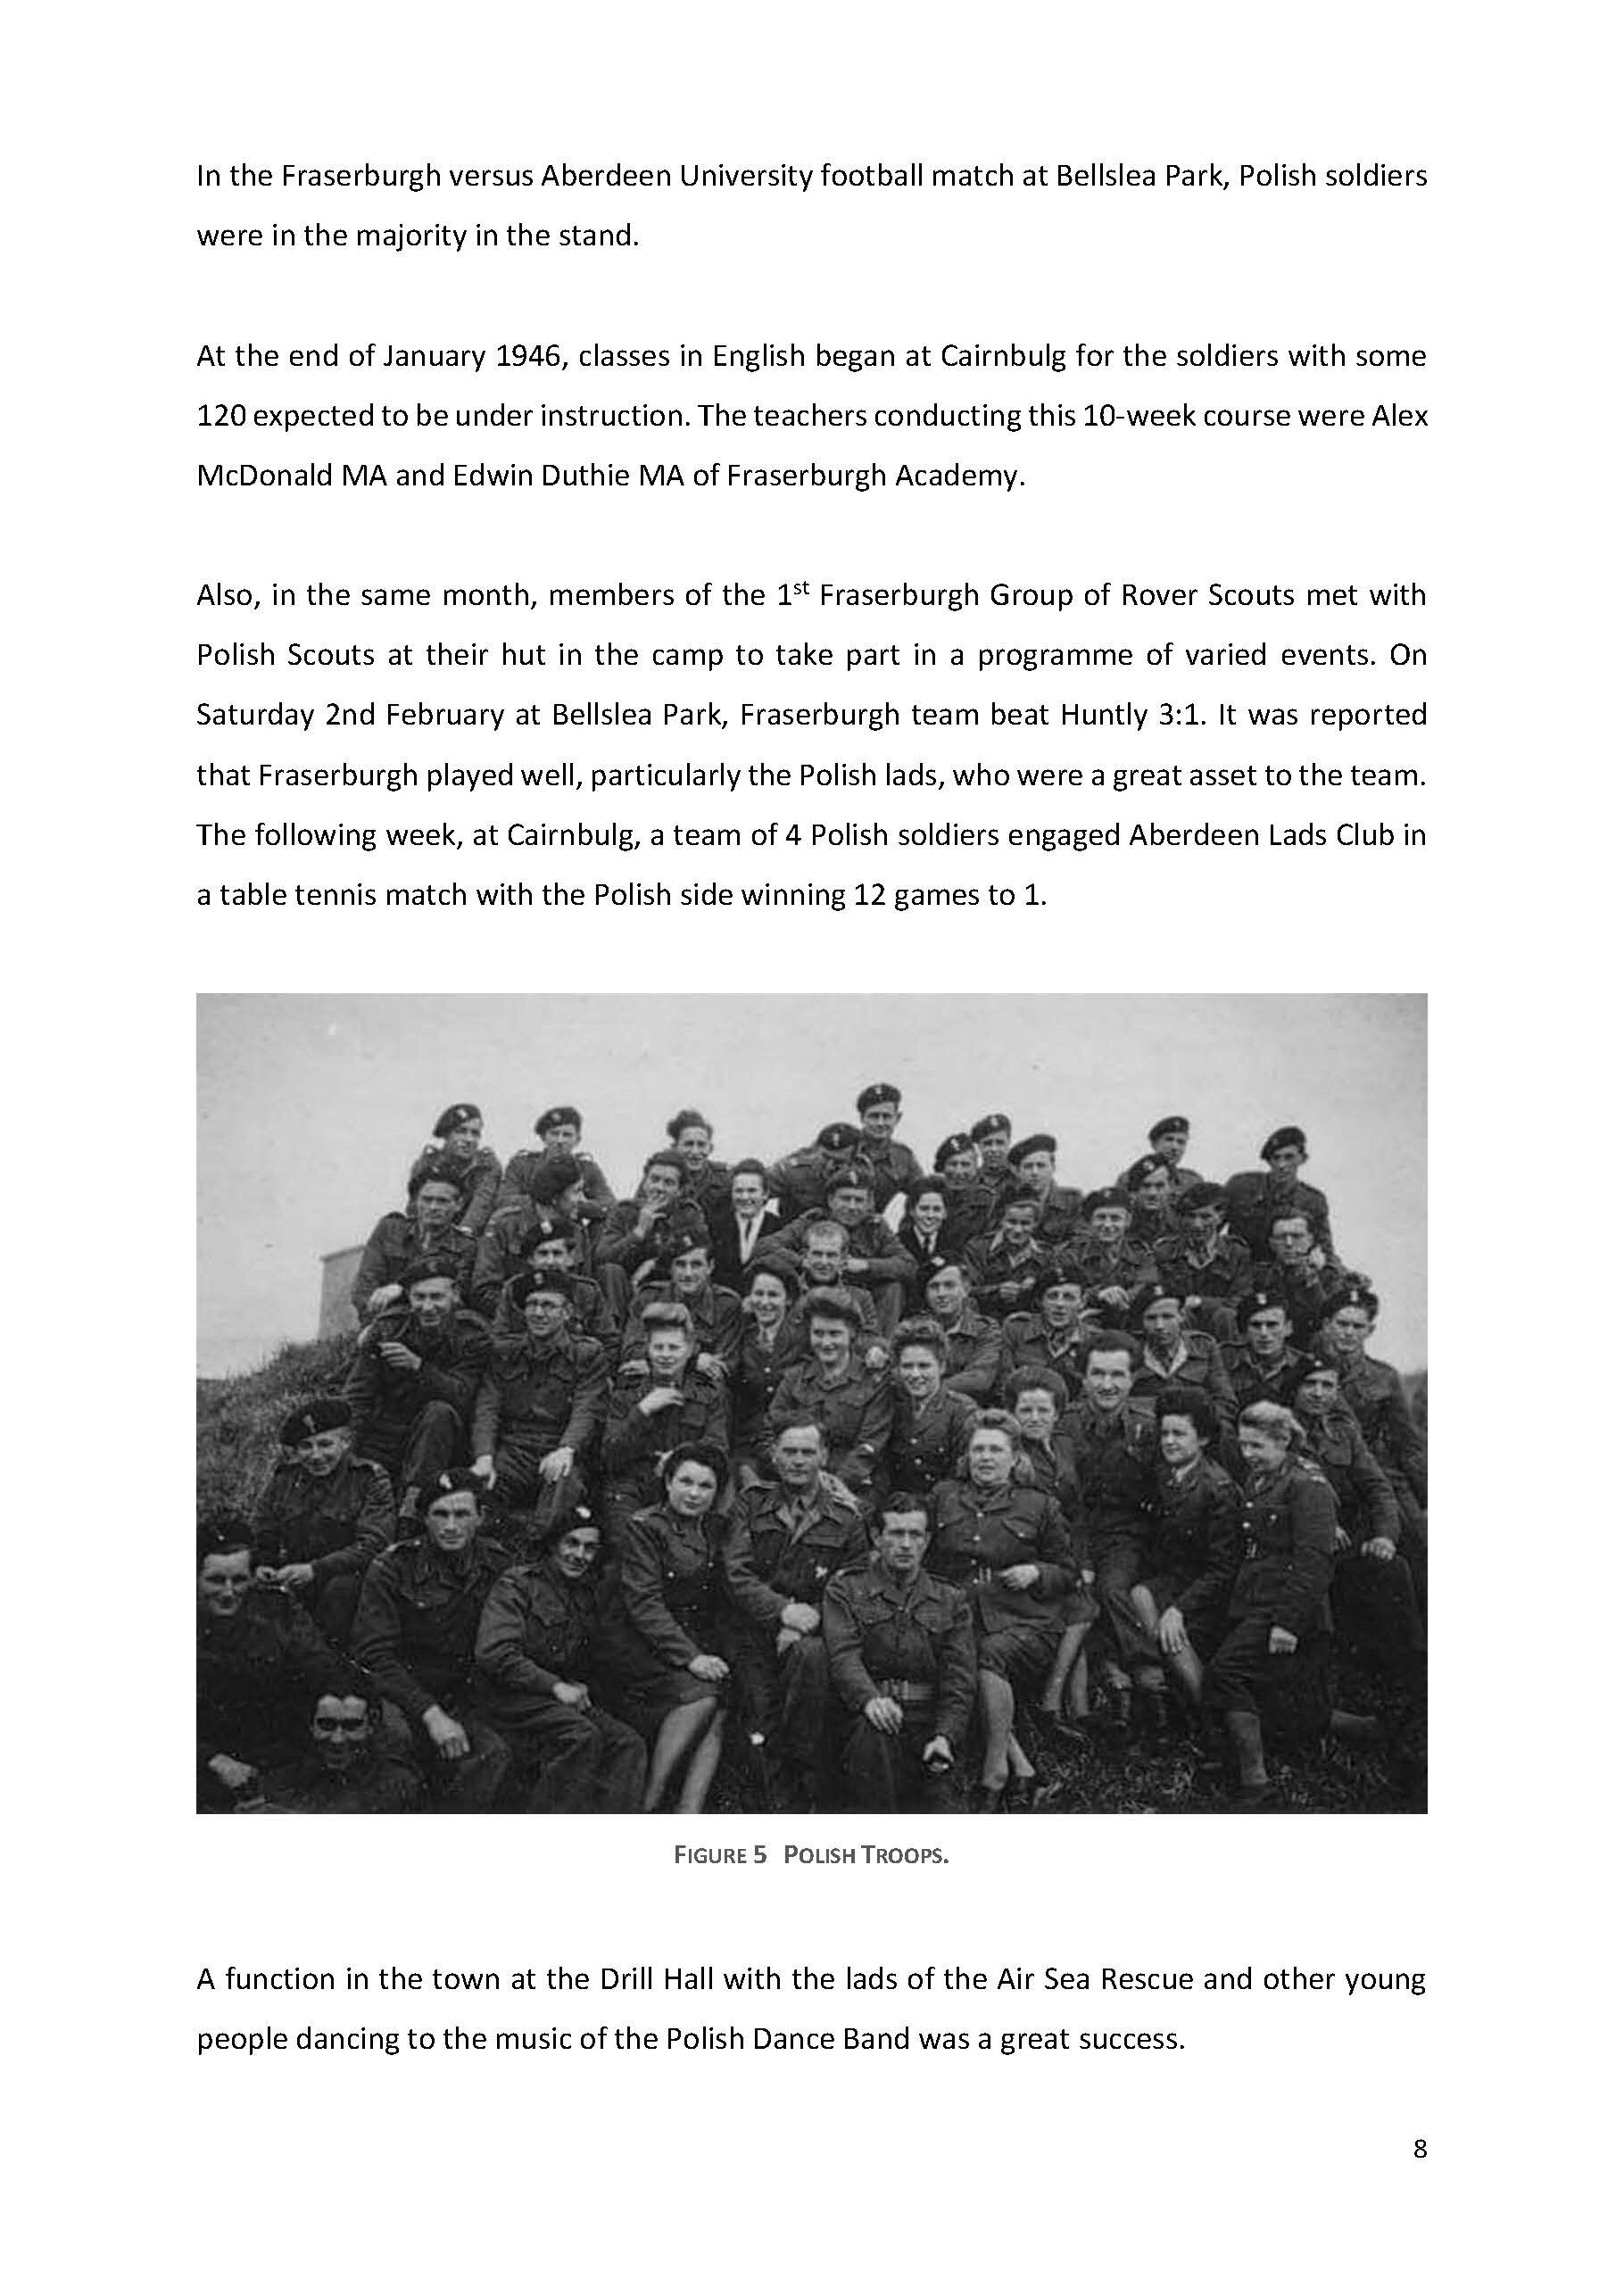 The Polish presence in the Fraserburgh Area Final_Page_09.jpg